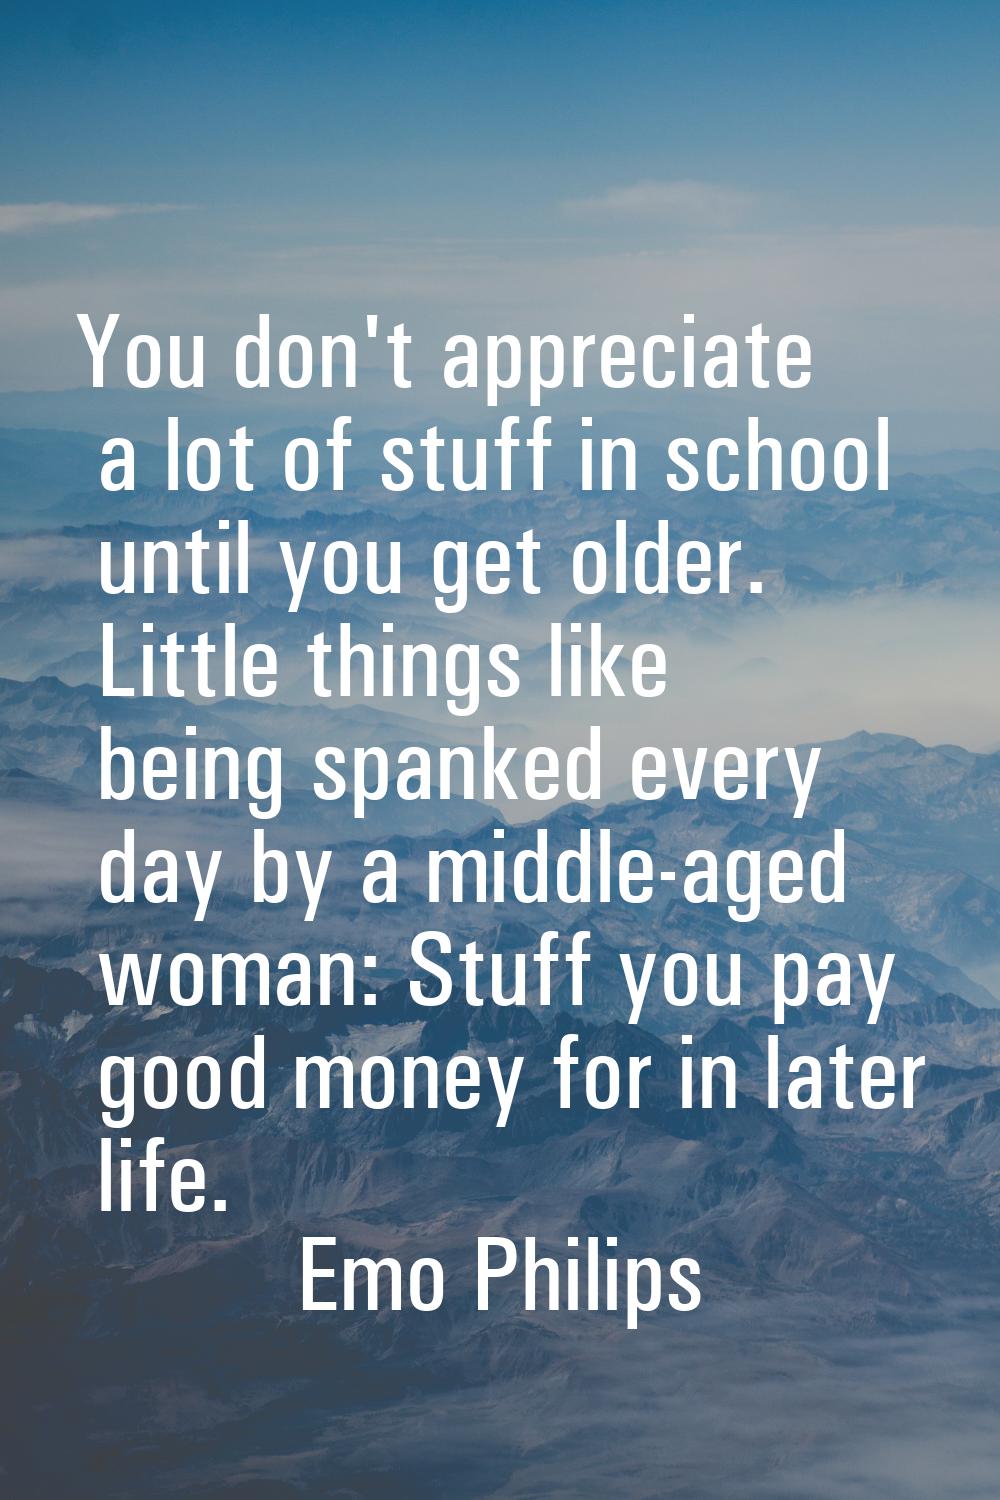 You don't appreciate a lot of stuff in school until you get older. Little things like being spanked